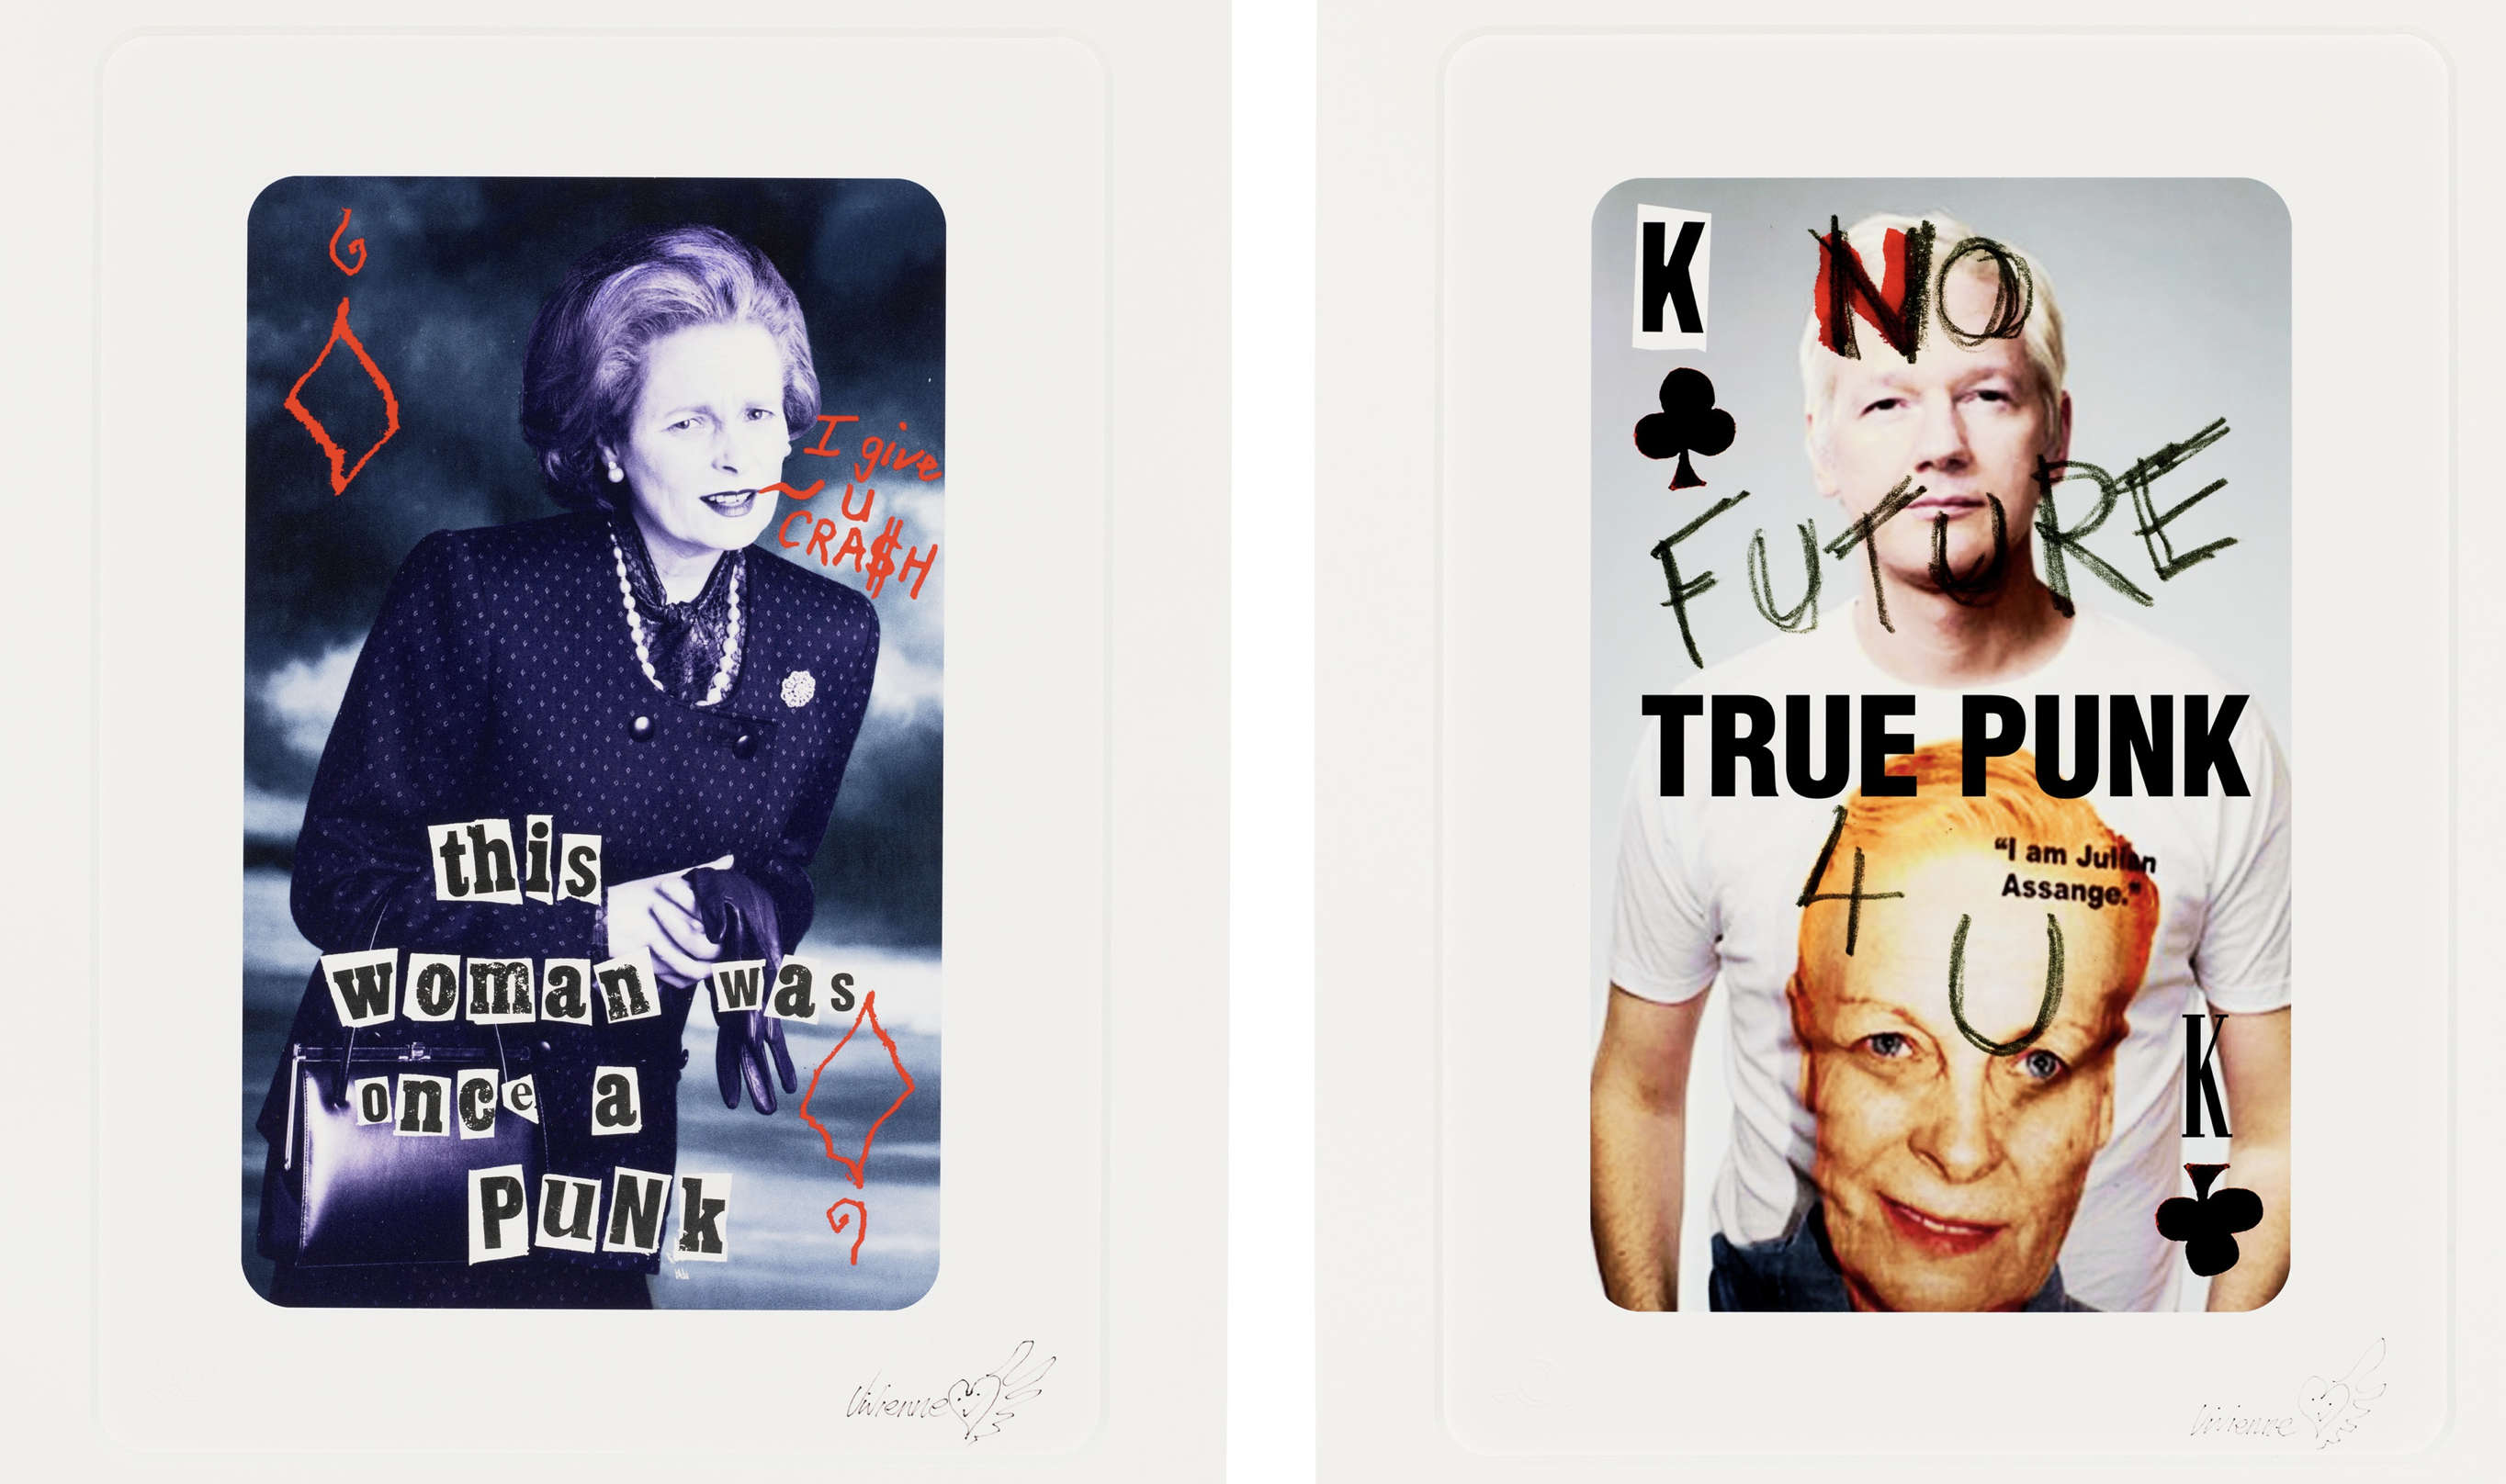 Vivienne Westwood designed playing cards to go to auction - Quest Media ...